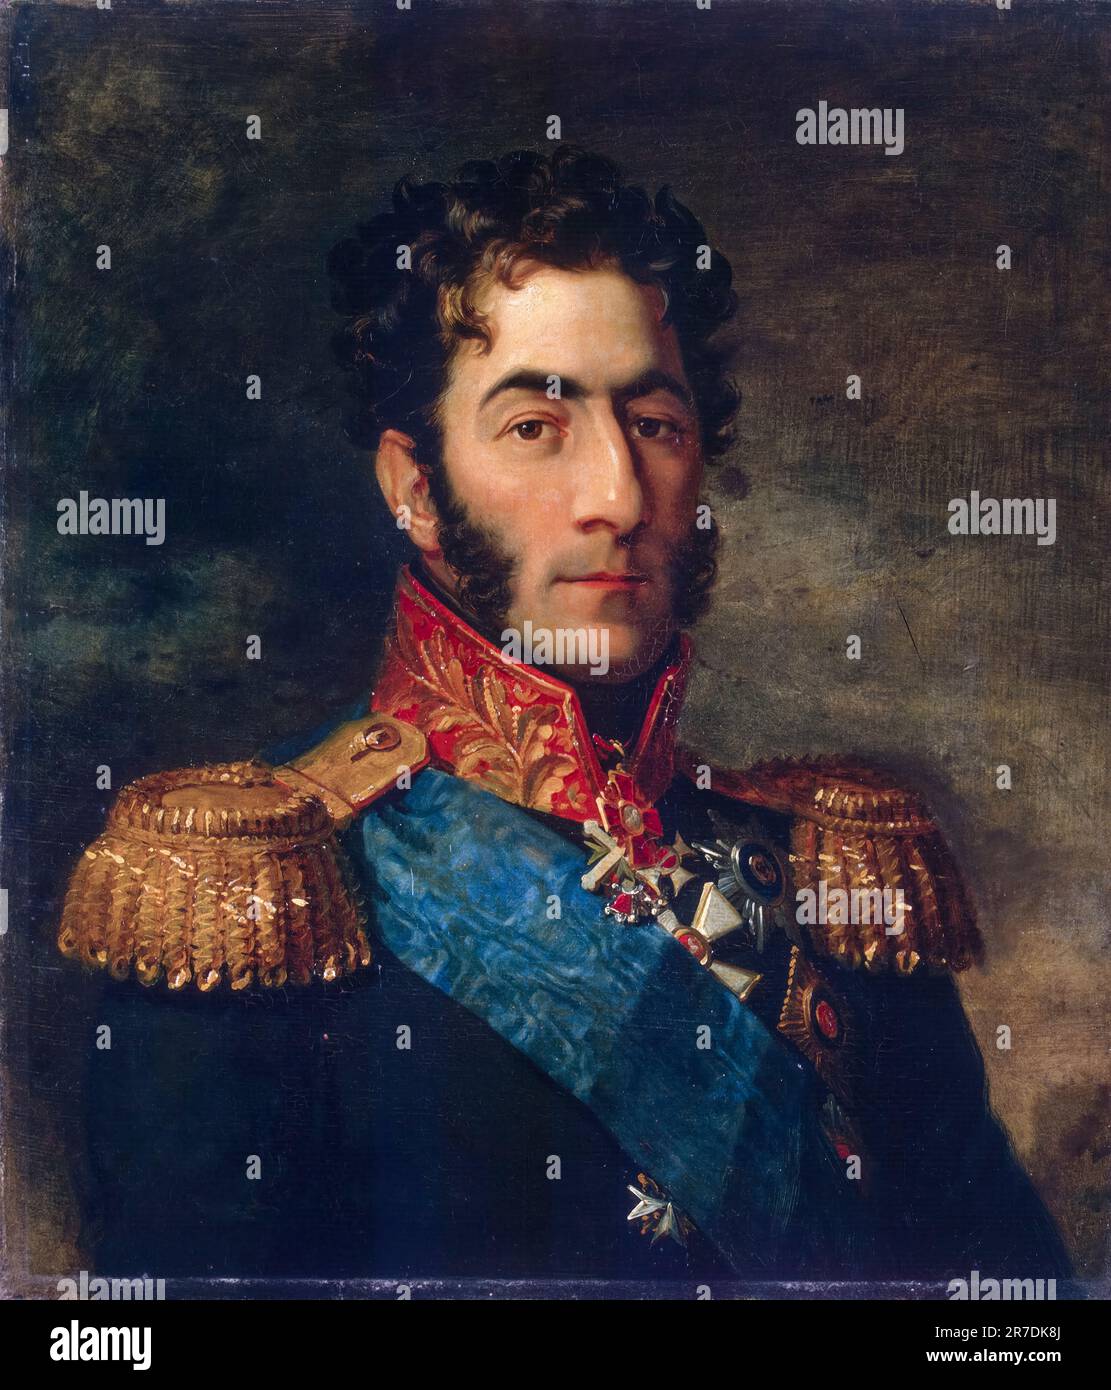 Pyotr Bagration (1765-1812), Russian General, portrait painting in oil on canvas by George Dawe, before 1825 Stock Photo